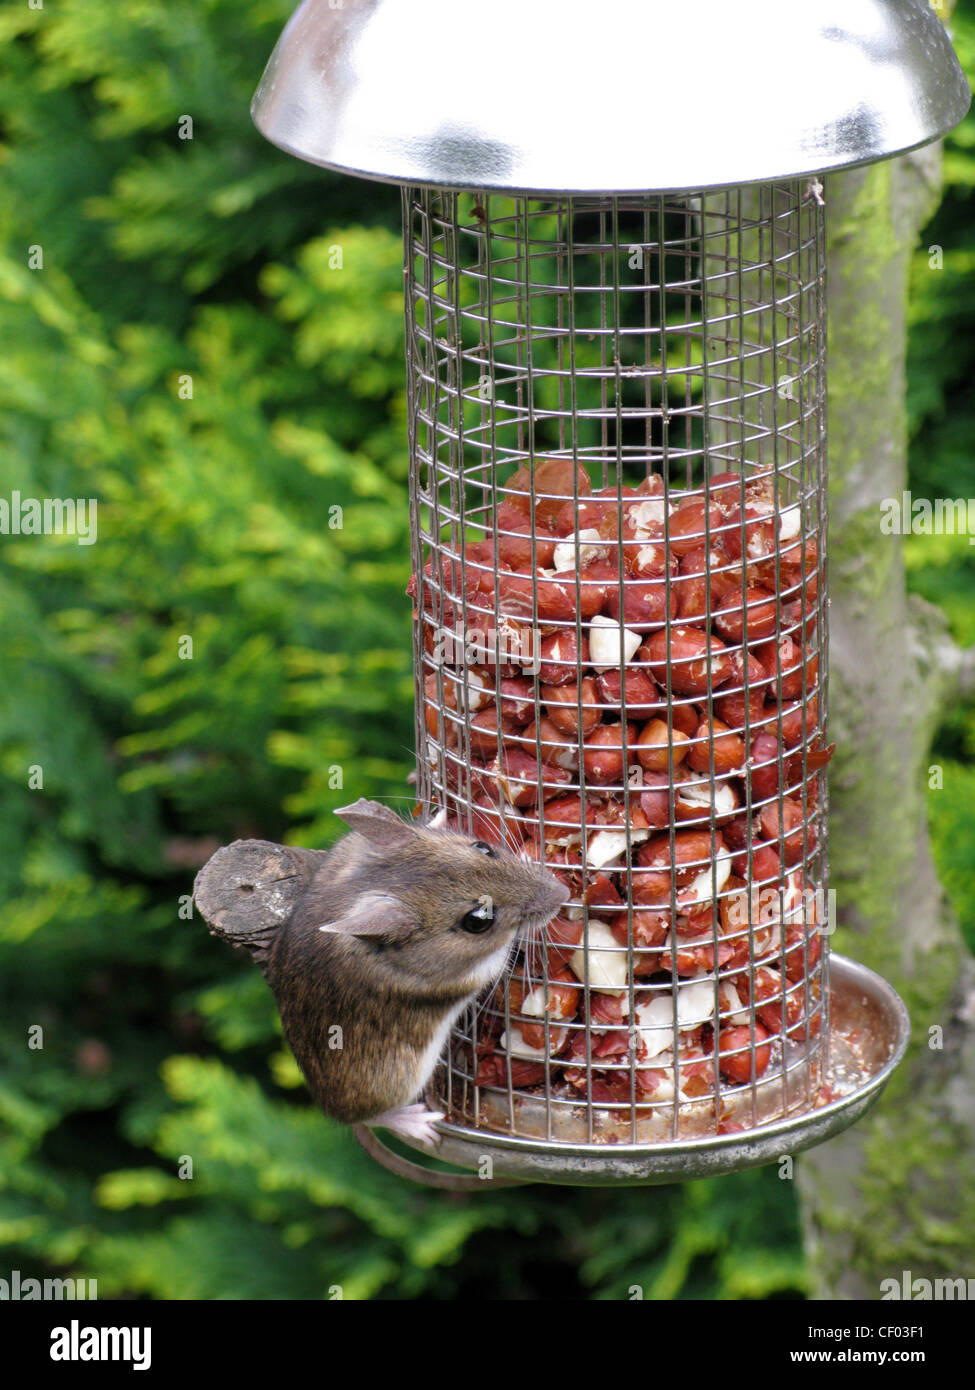 Common house mouse eating from a peanut feeder for birds in a garden Stock Photo